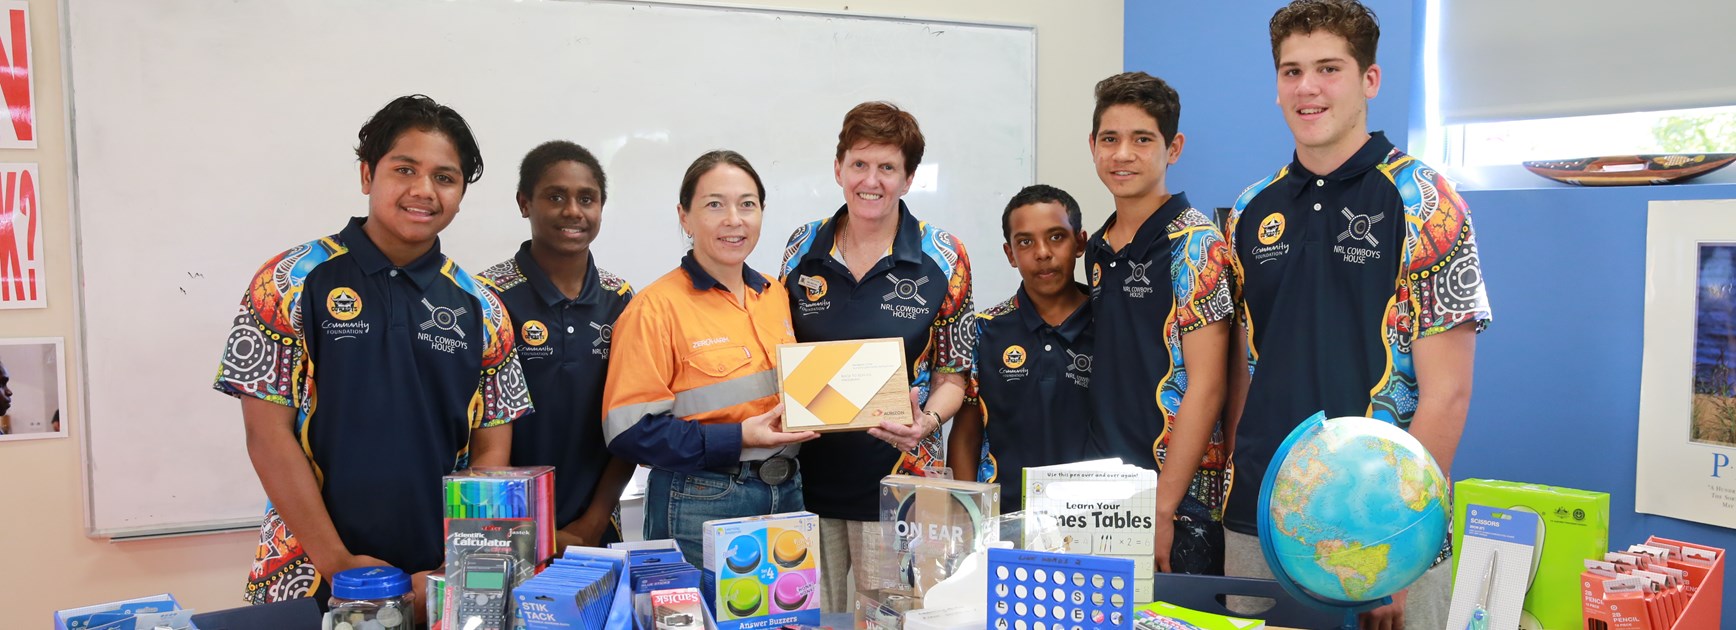 Grant boosts student's confidence